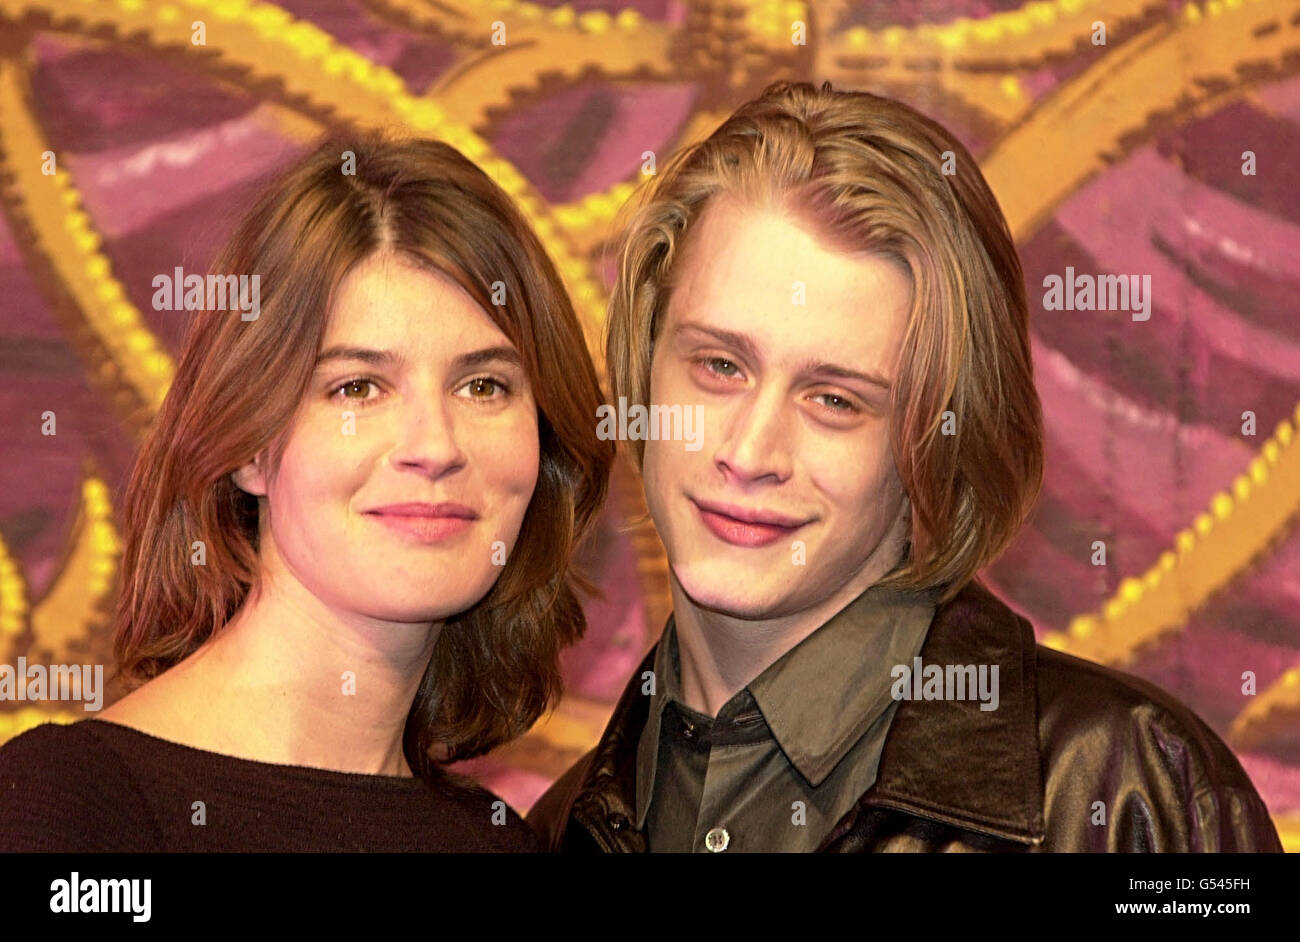 American actor Macaulay Culkin, who starred in the film Home Alone, with actress Irene Jacob at the Vaudeville Theatre in London. Culkin makes his West End acting debut in a new play by Richard Nelson, entitled Madam Melville. *... He plays Carl, a young American in Paris in 1966 who is seduced by the title character played by Jacobs. The play has its world premiere on October 18 2000. Stock Photo